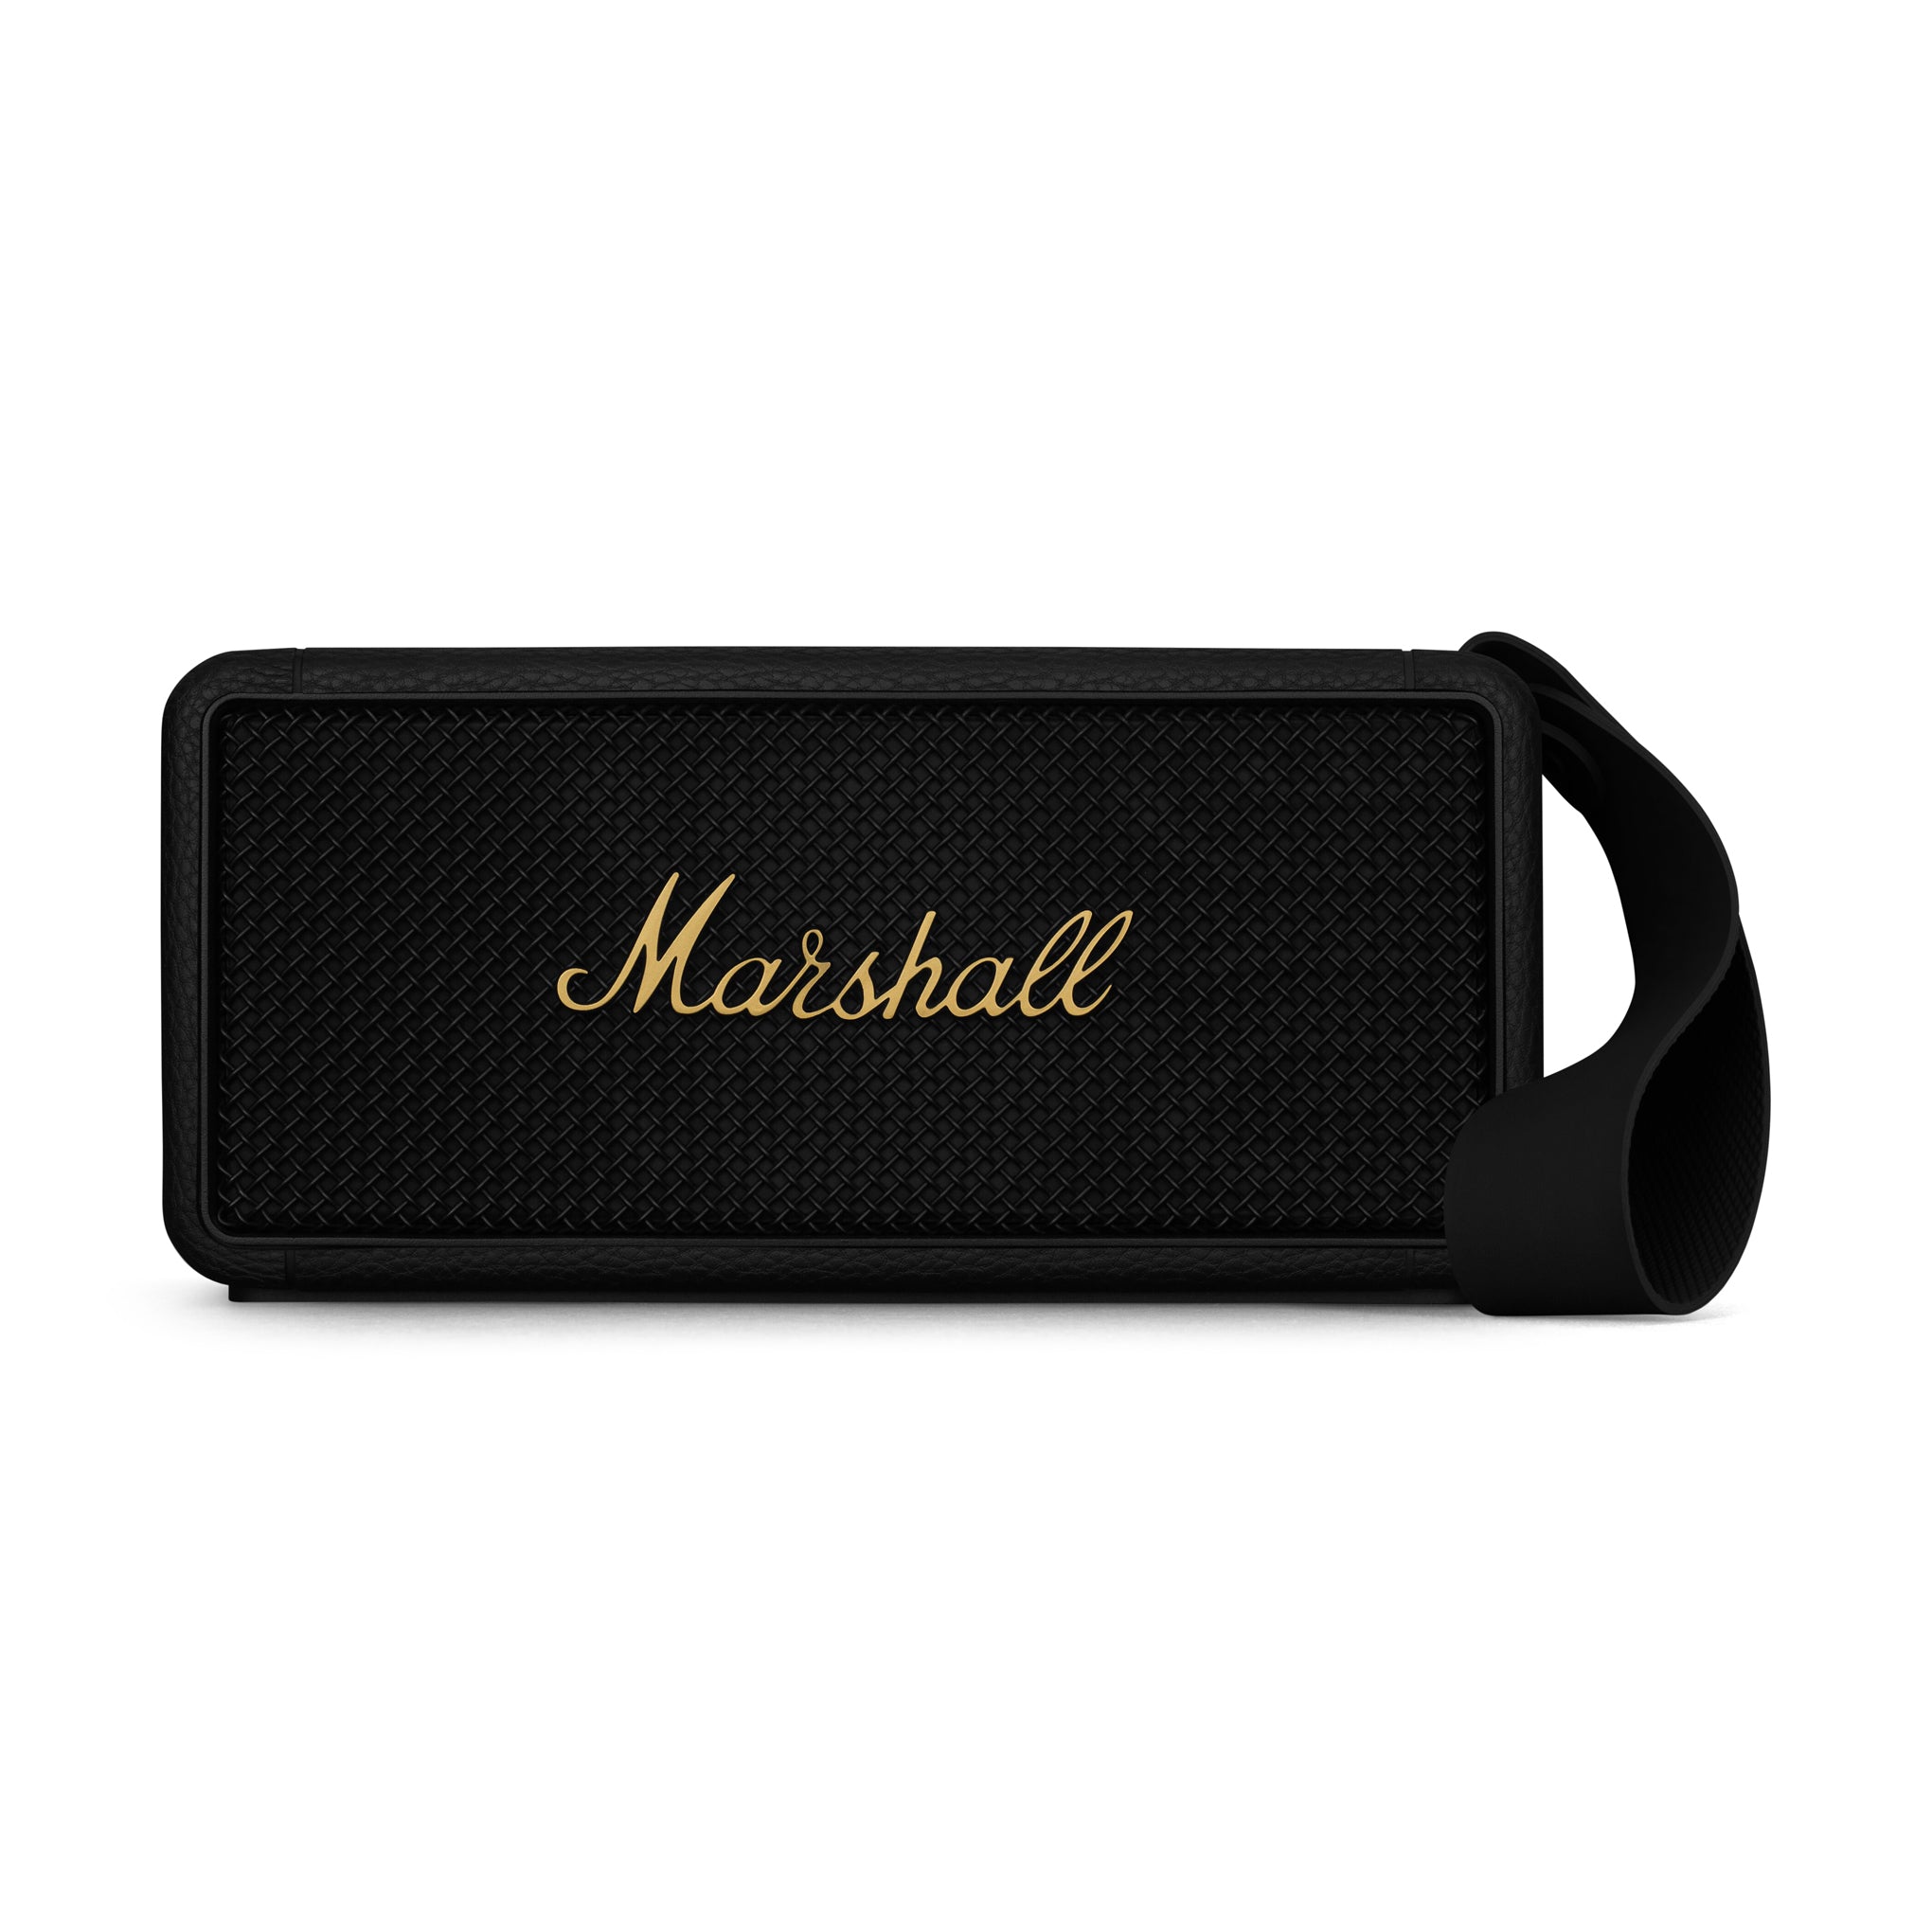 Marshall Middleton with quad-speaker setup launched in India